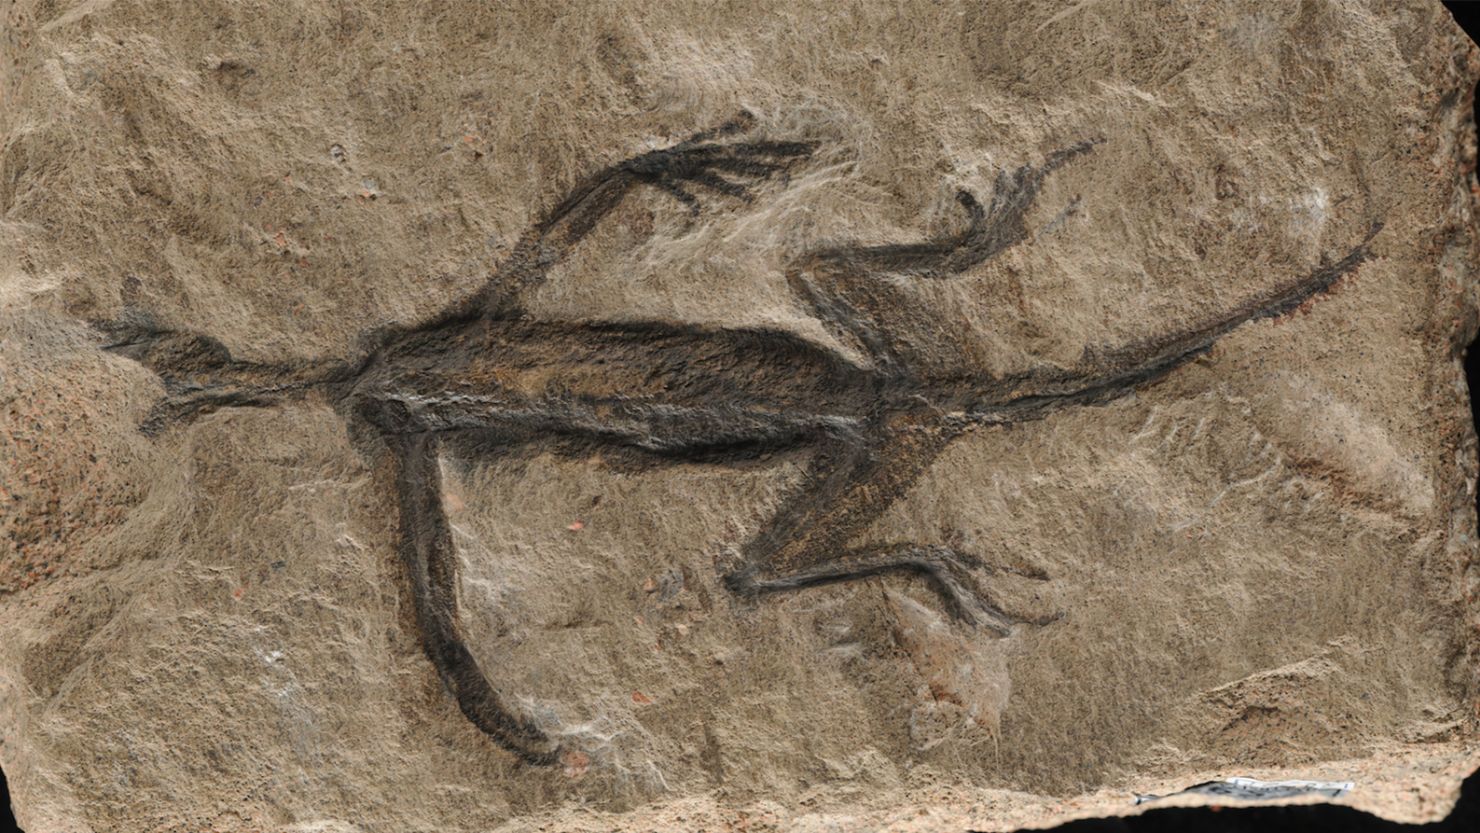 The fossil, discovered in 1931, was thought to be an ancient reptile. Now, researchers are questioning its true nature.